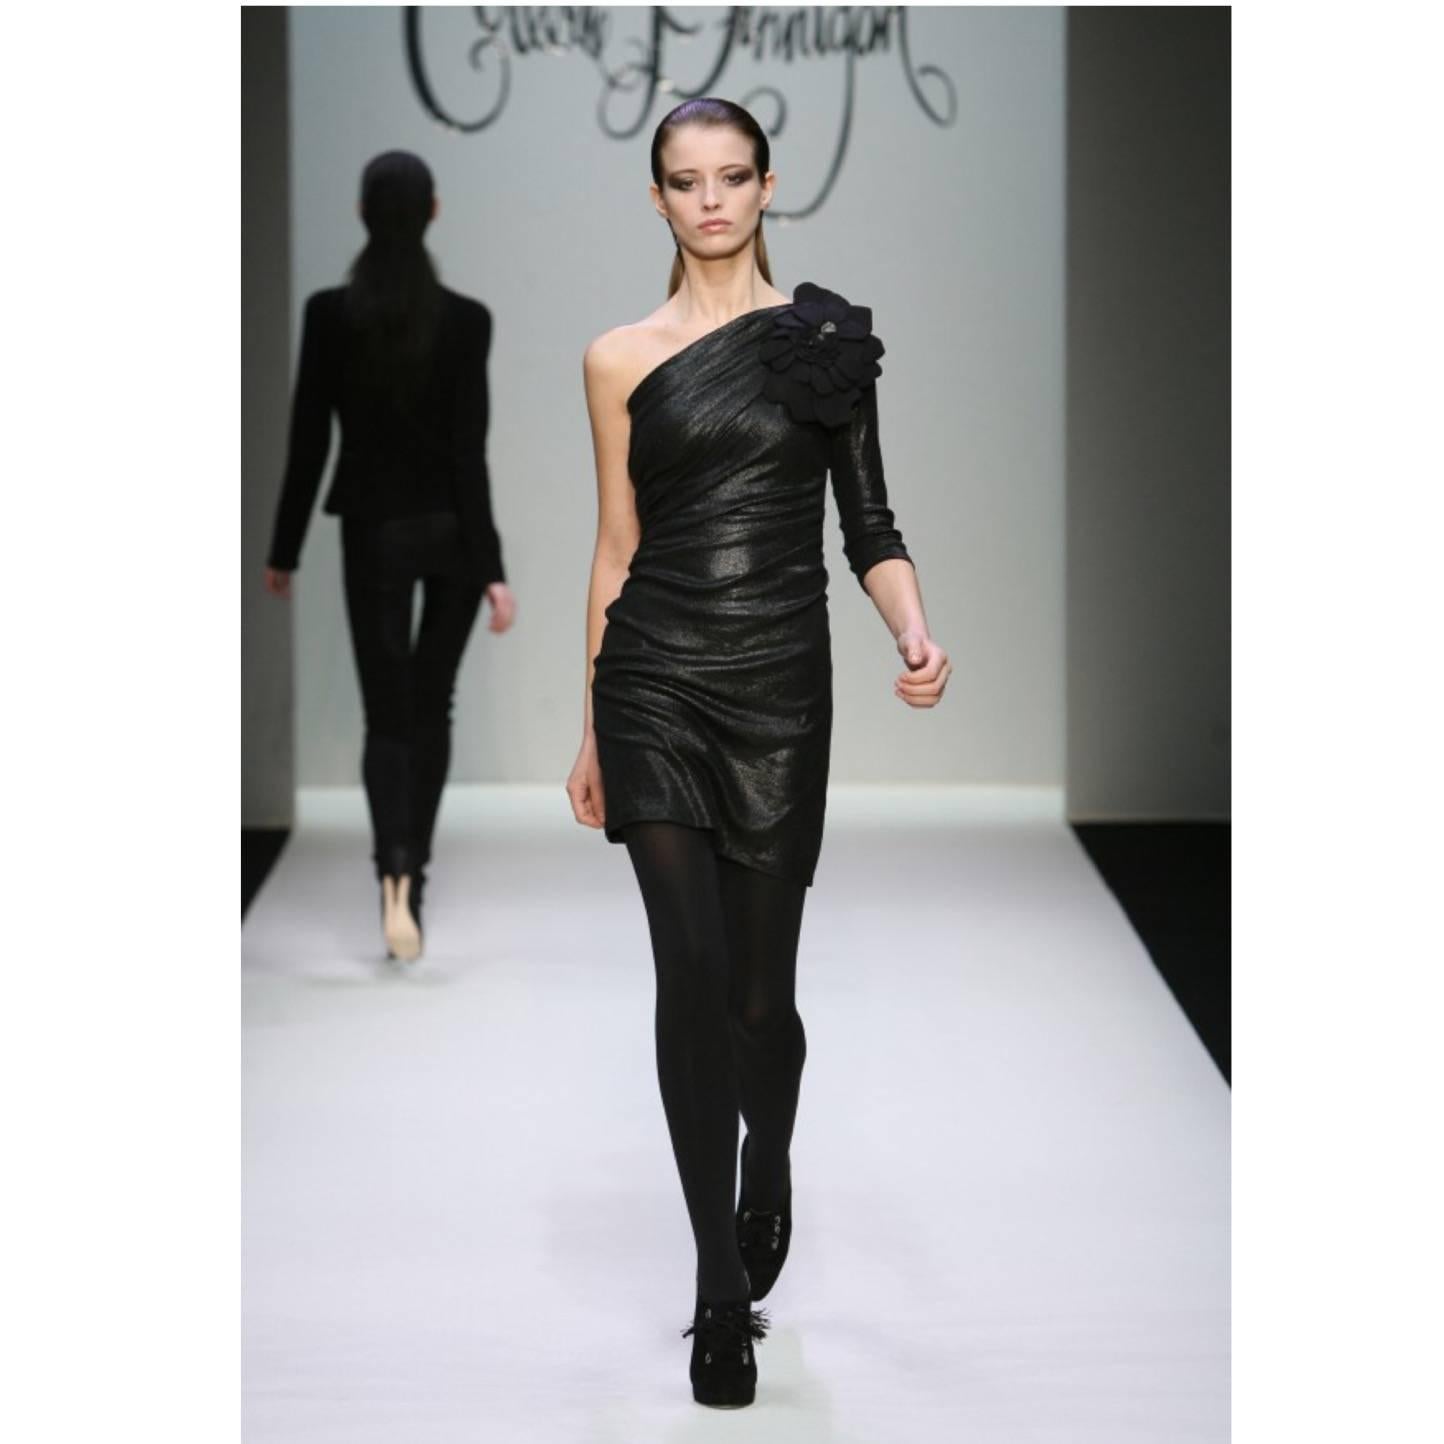 Australian born designer, Collette Dinnigan, is acclaimed in the world of fashion as being the first Australian-born designer to showcase a full ready-to-wear collection at Paris Fashion Week in 1995 and was later invited to continually show at